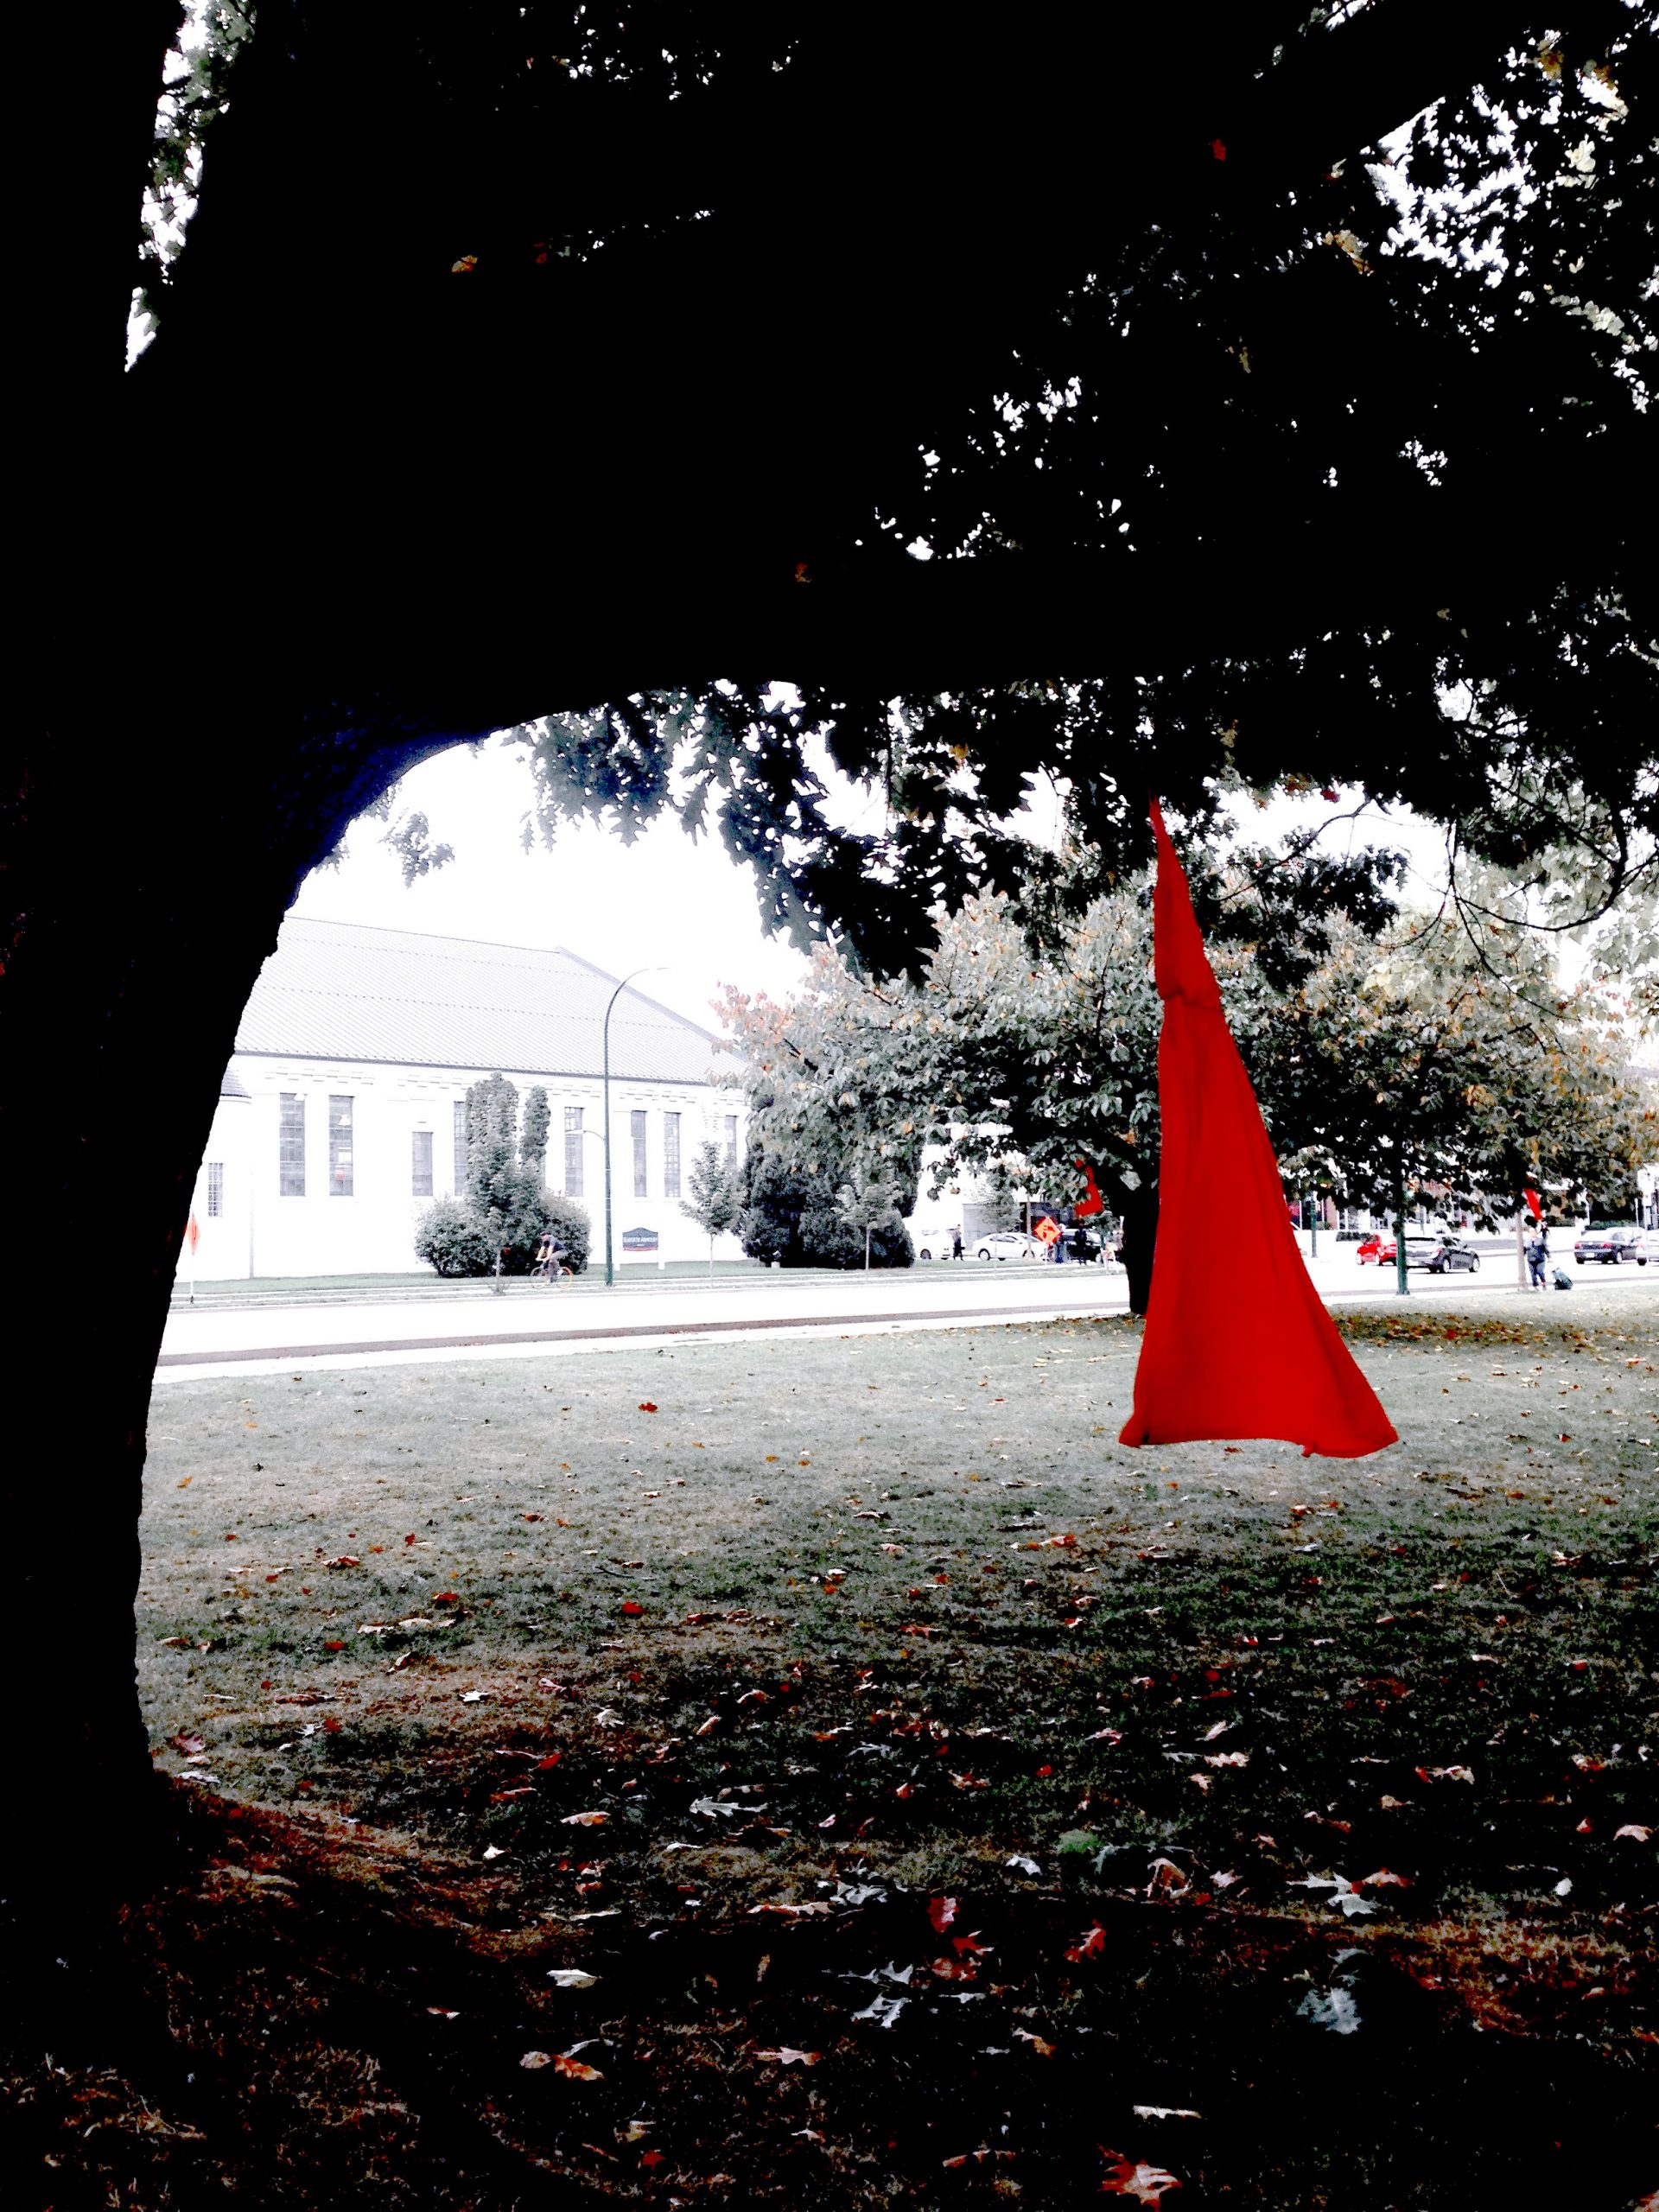 large tree at left with red dress hanging from it.